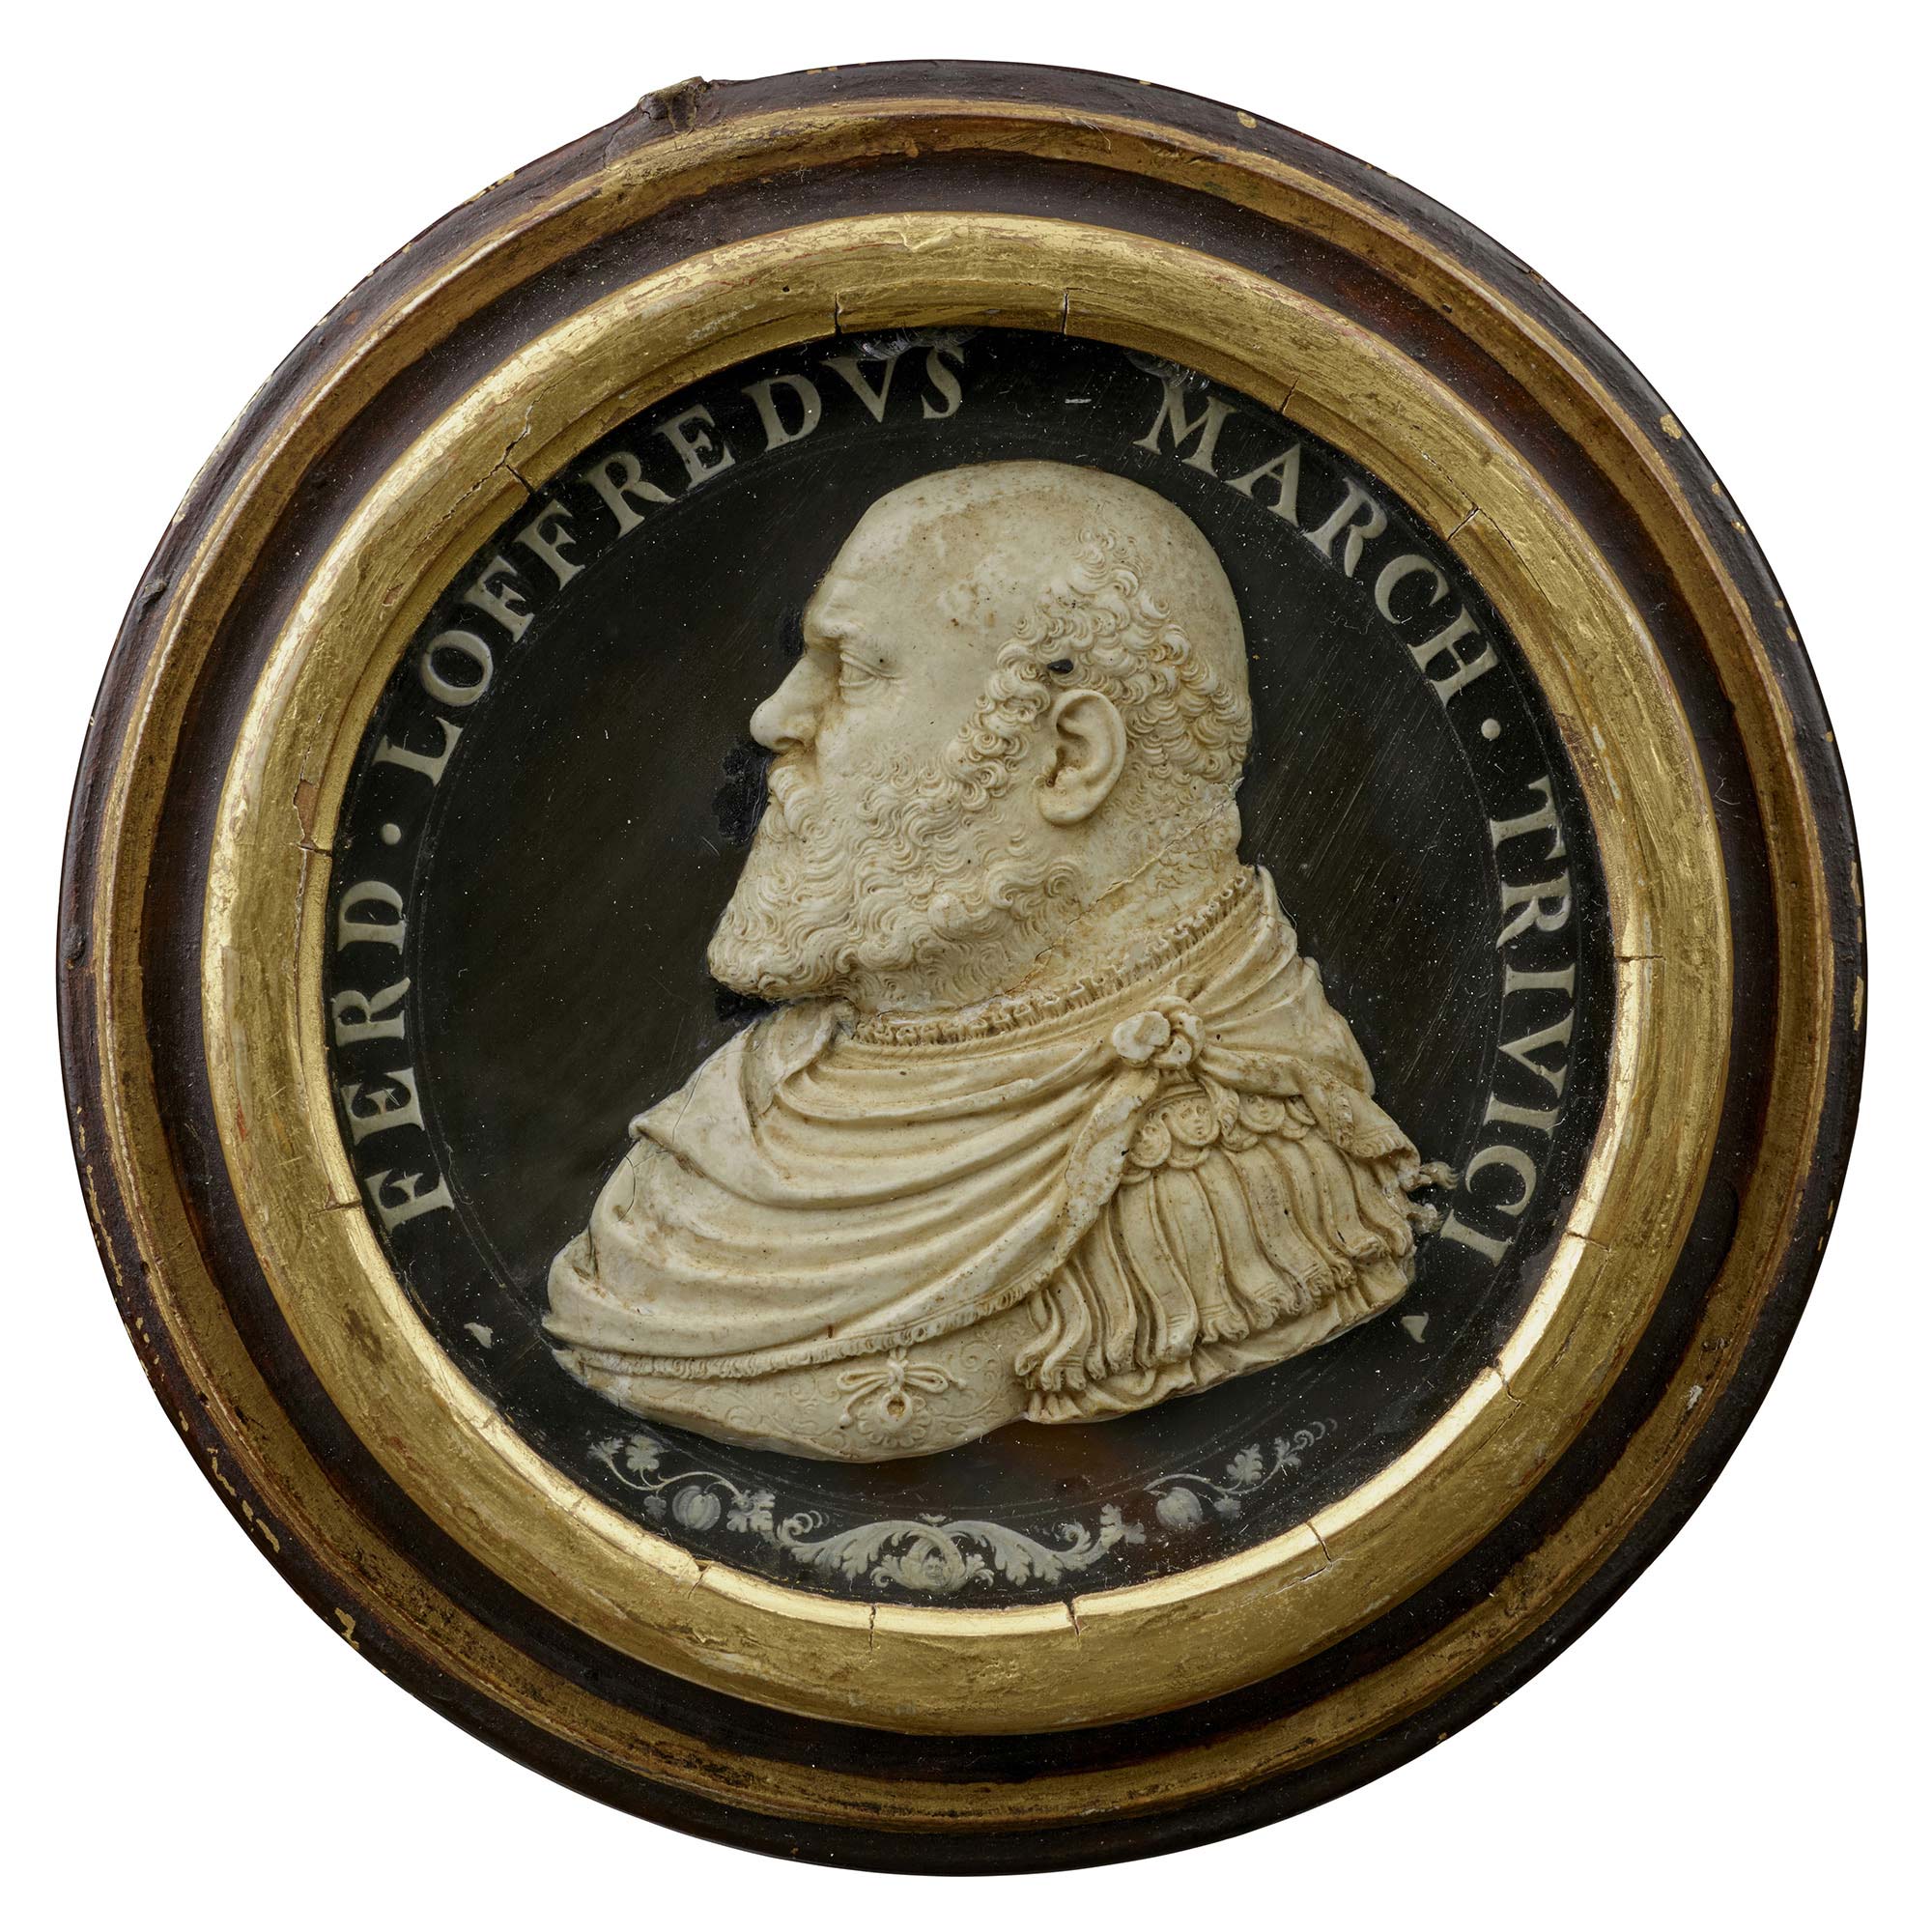 Wax model on a black background for a portrait medal of Ferrante Loffredo wearing armor with drapery, with curly hair and beard, in profile to the left, in a wooden frame